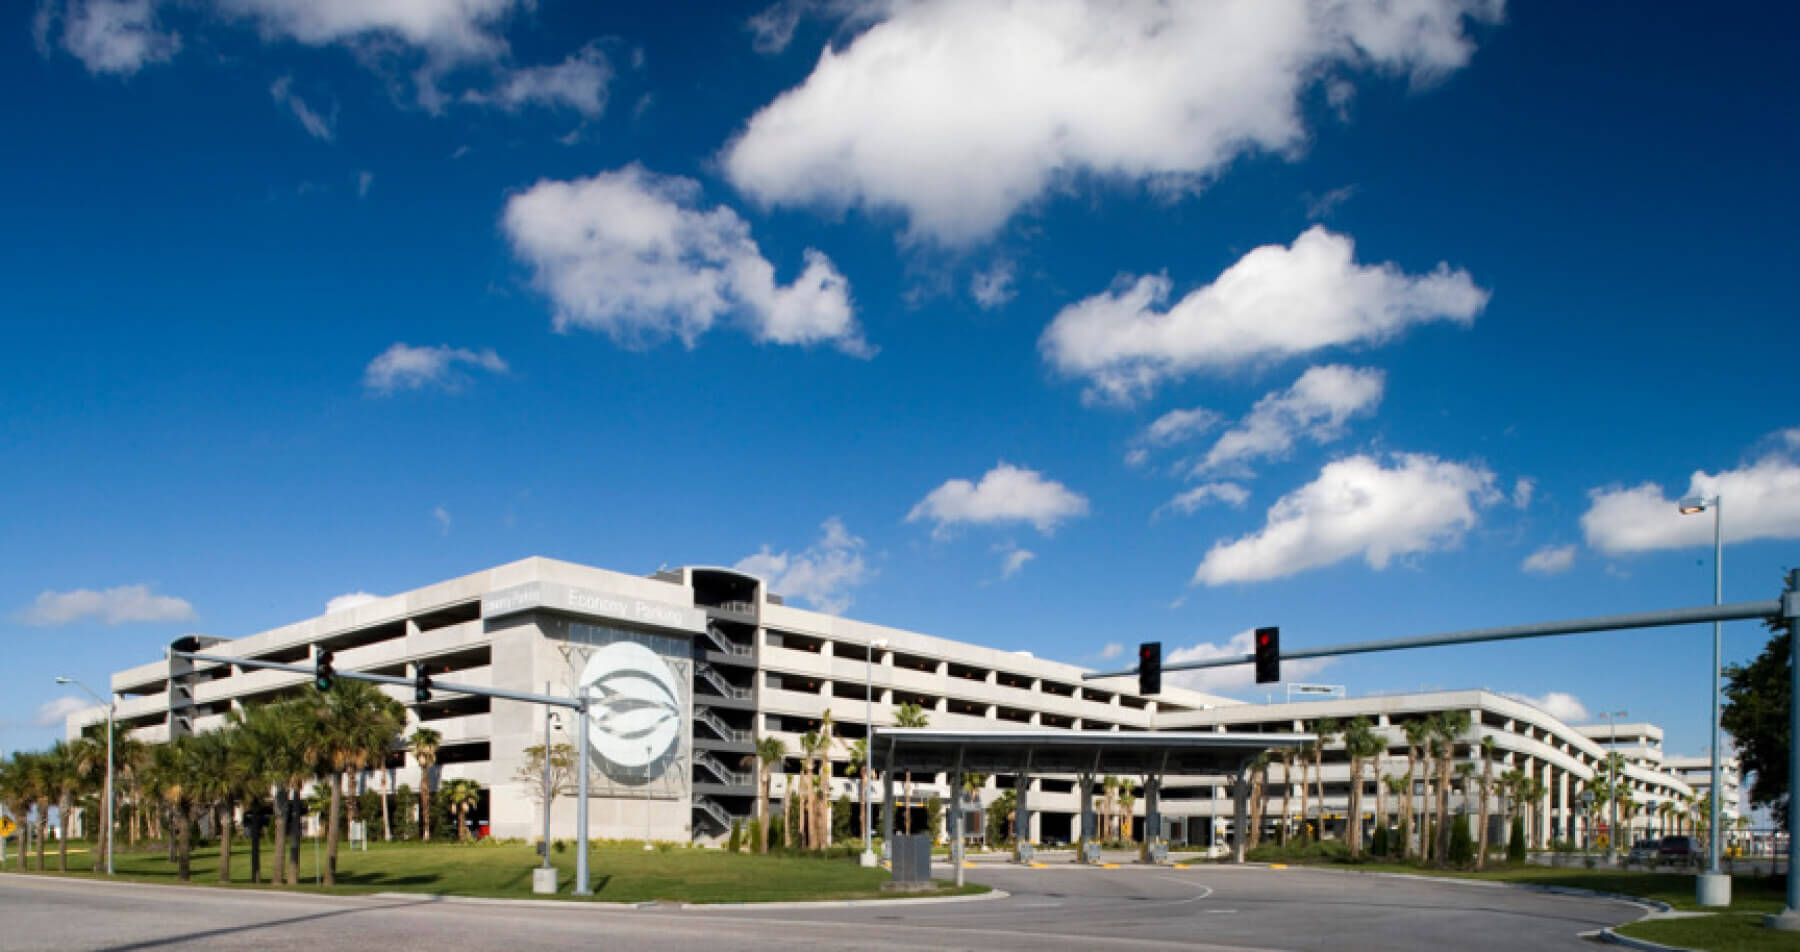 the exterior of the economy parking garage at Tampa International Airport from across the street